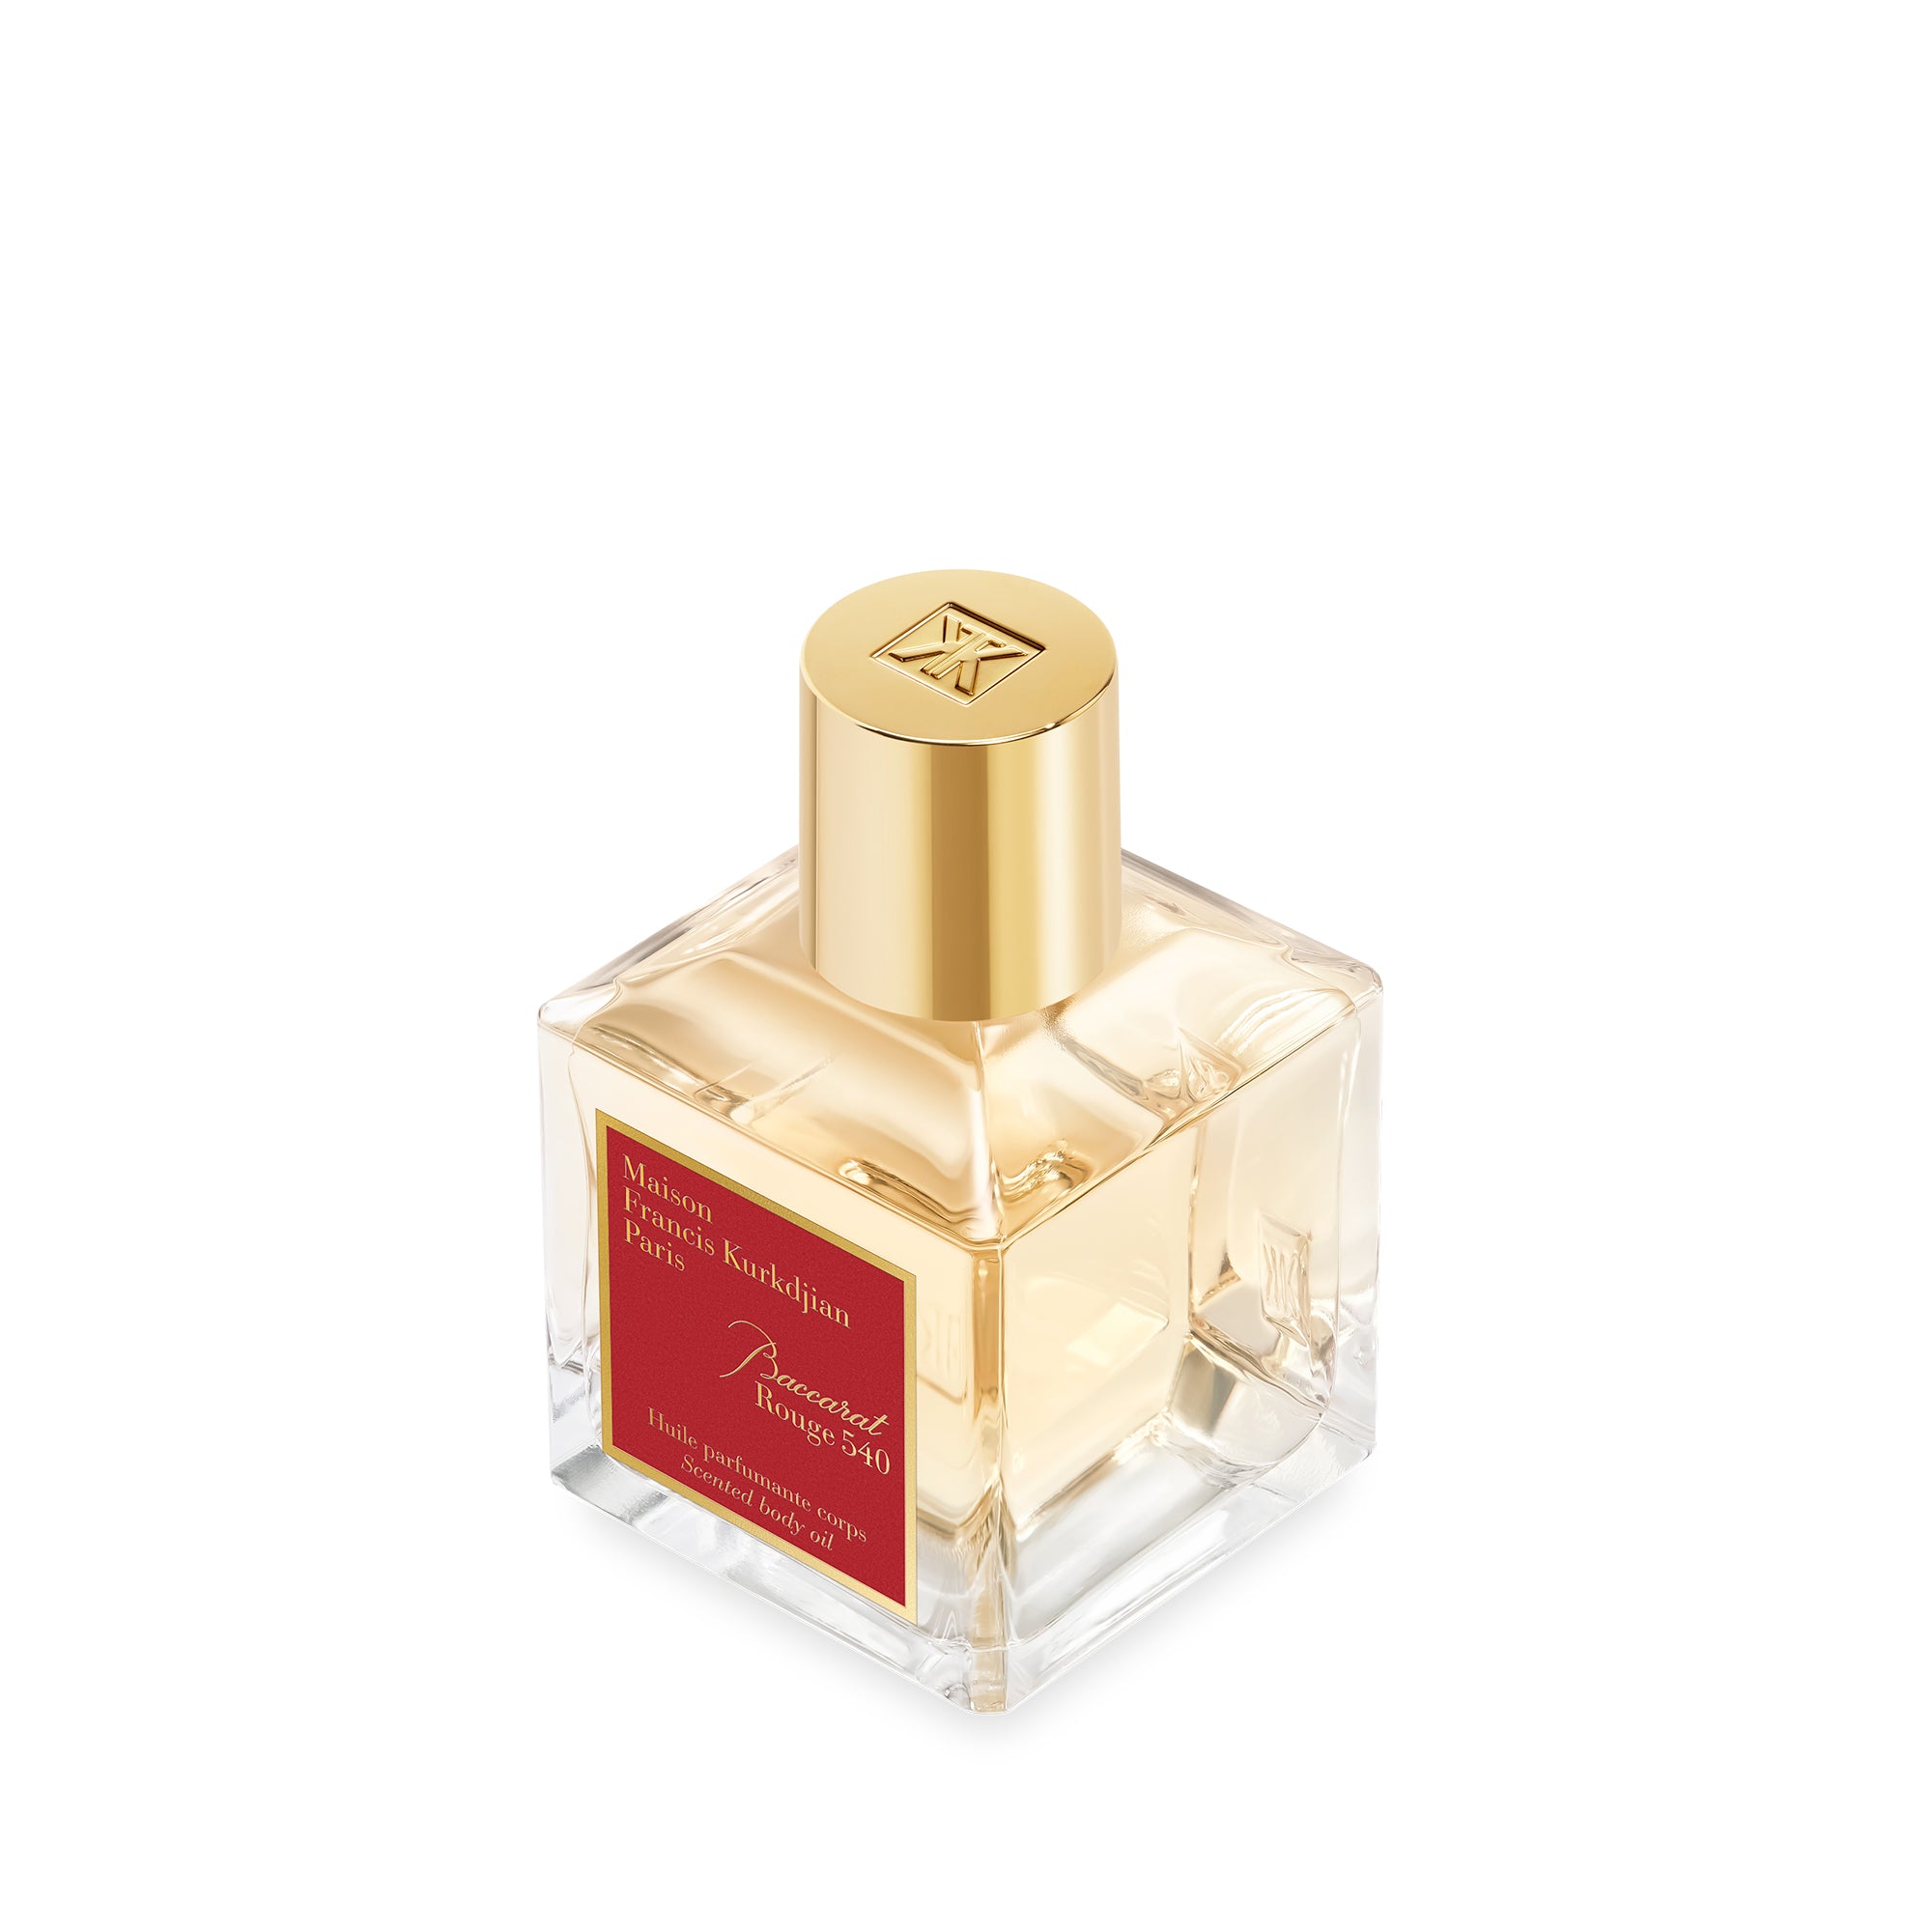 Baccarat Rouge 540 Sparkling Body Oil + Chanel N°5 The Gold Body Oil